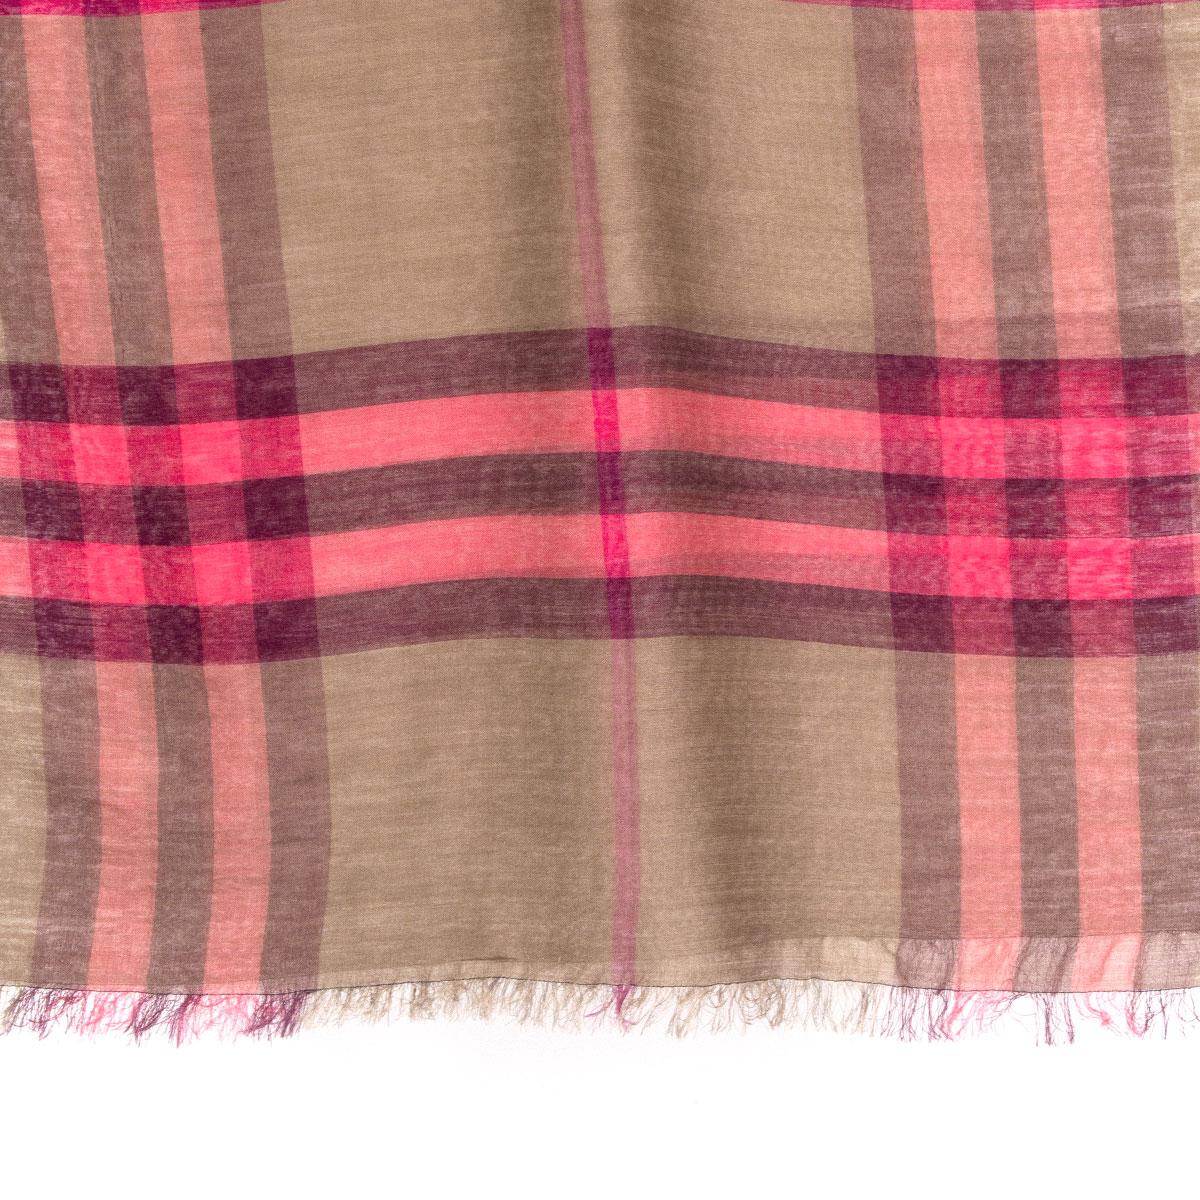 100% authentic Burberry scarf in pink, magenta and camel cotton and silk (feels like - content tag is missing). Has been worn and is in excellent condition. 

Width	70cm (27.3in)
Length	200cm (78in)

All our listings include only the listed item